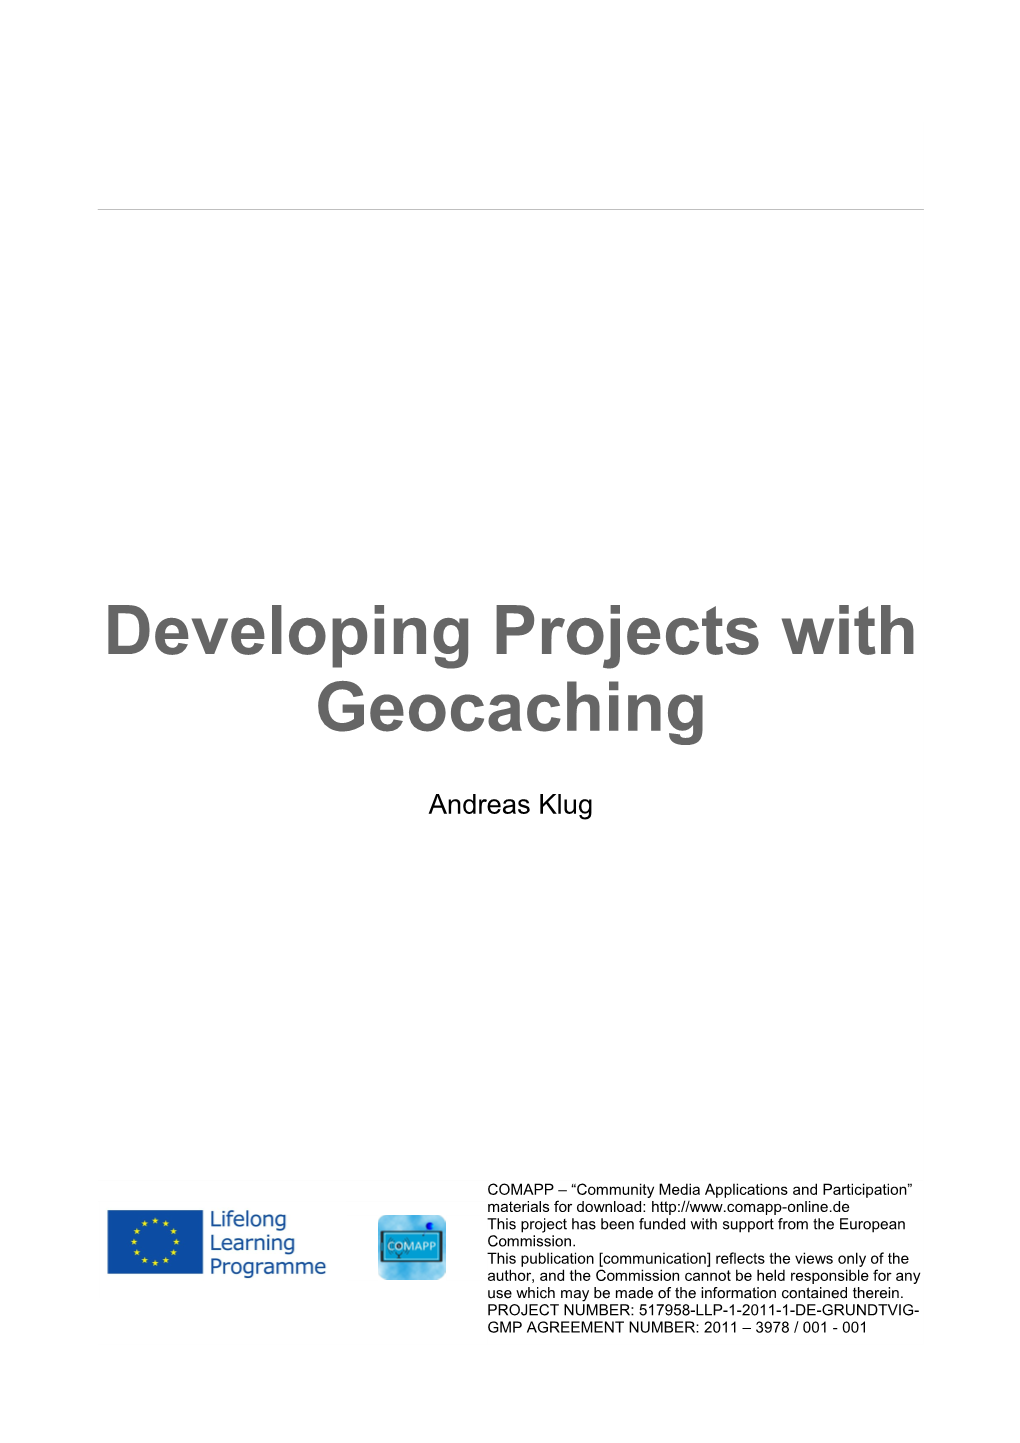 Andreas Klug: Developing Projects with Geocaching